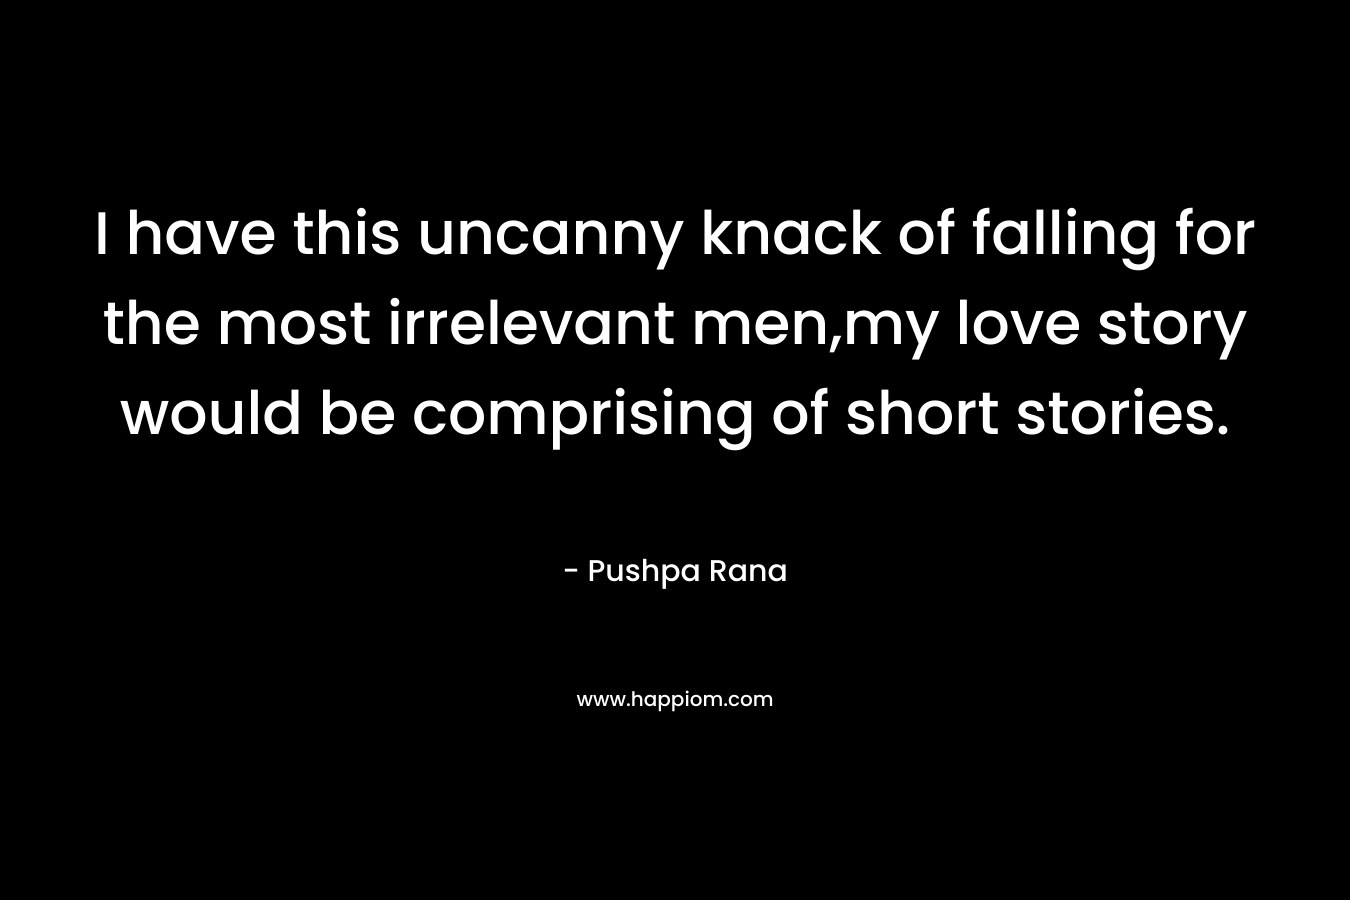 I have this uncanny knack of falling for the most irrelevant men,my love story would be comprising of short stories. – Pushpa Rana